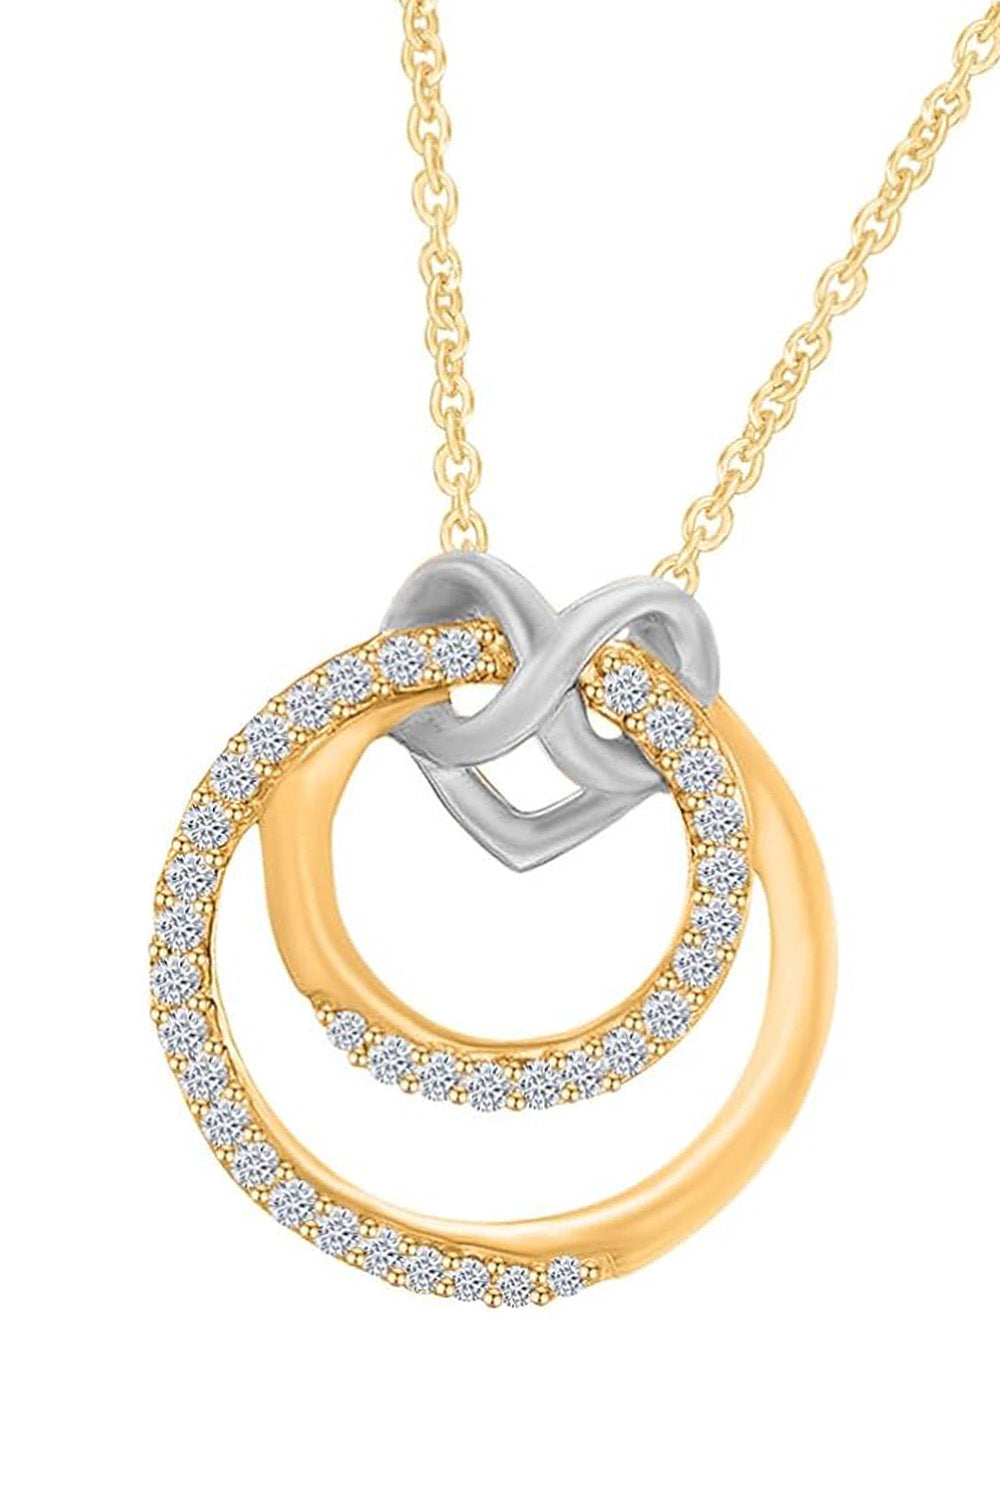 Yaathi 1/5Cttw Moissanite Infinity Heart and Double Circle Pendant Necklace in 18k Gold over Sterling Silver.